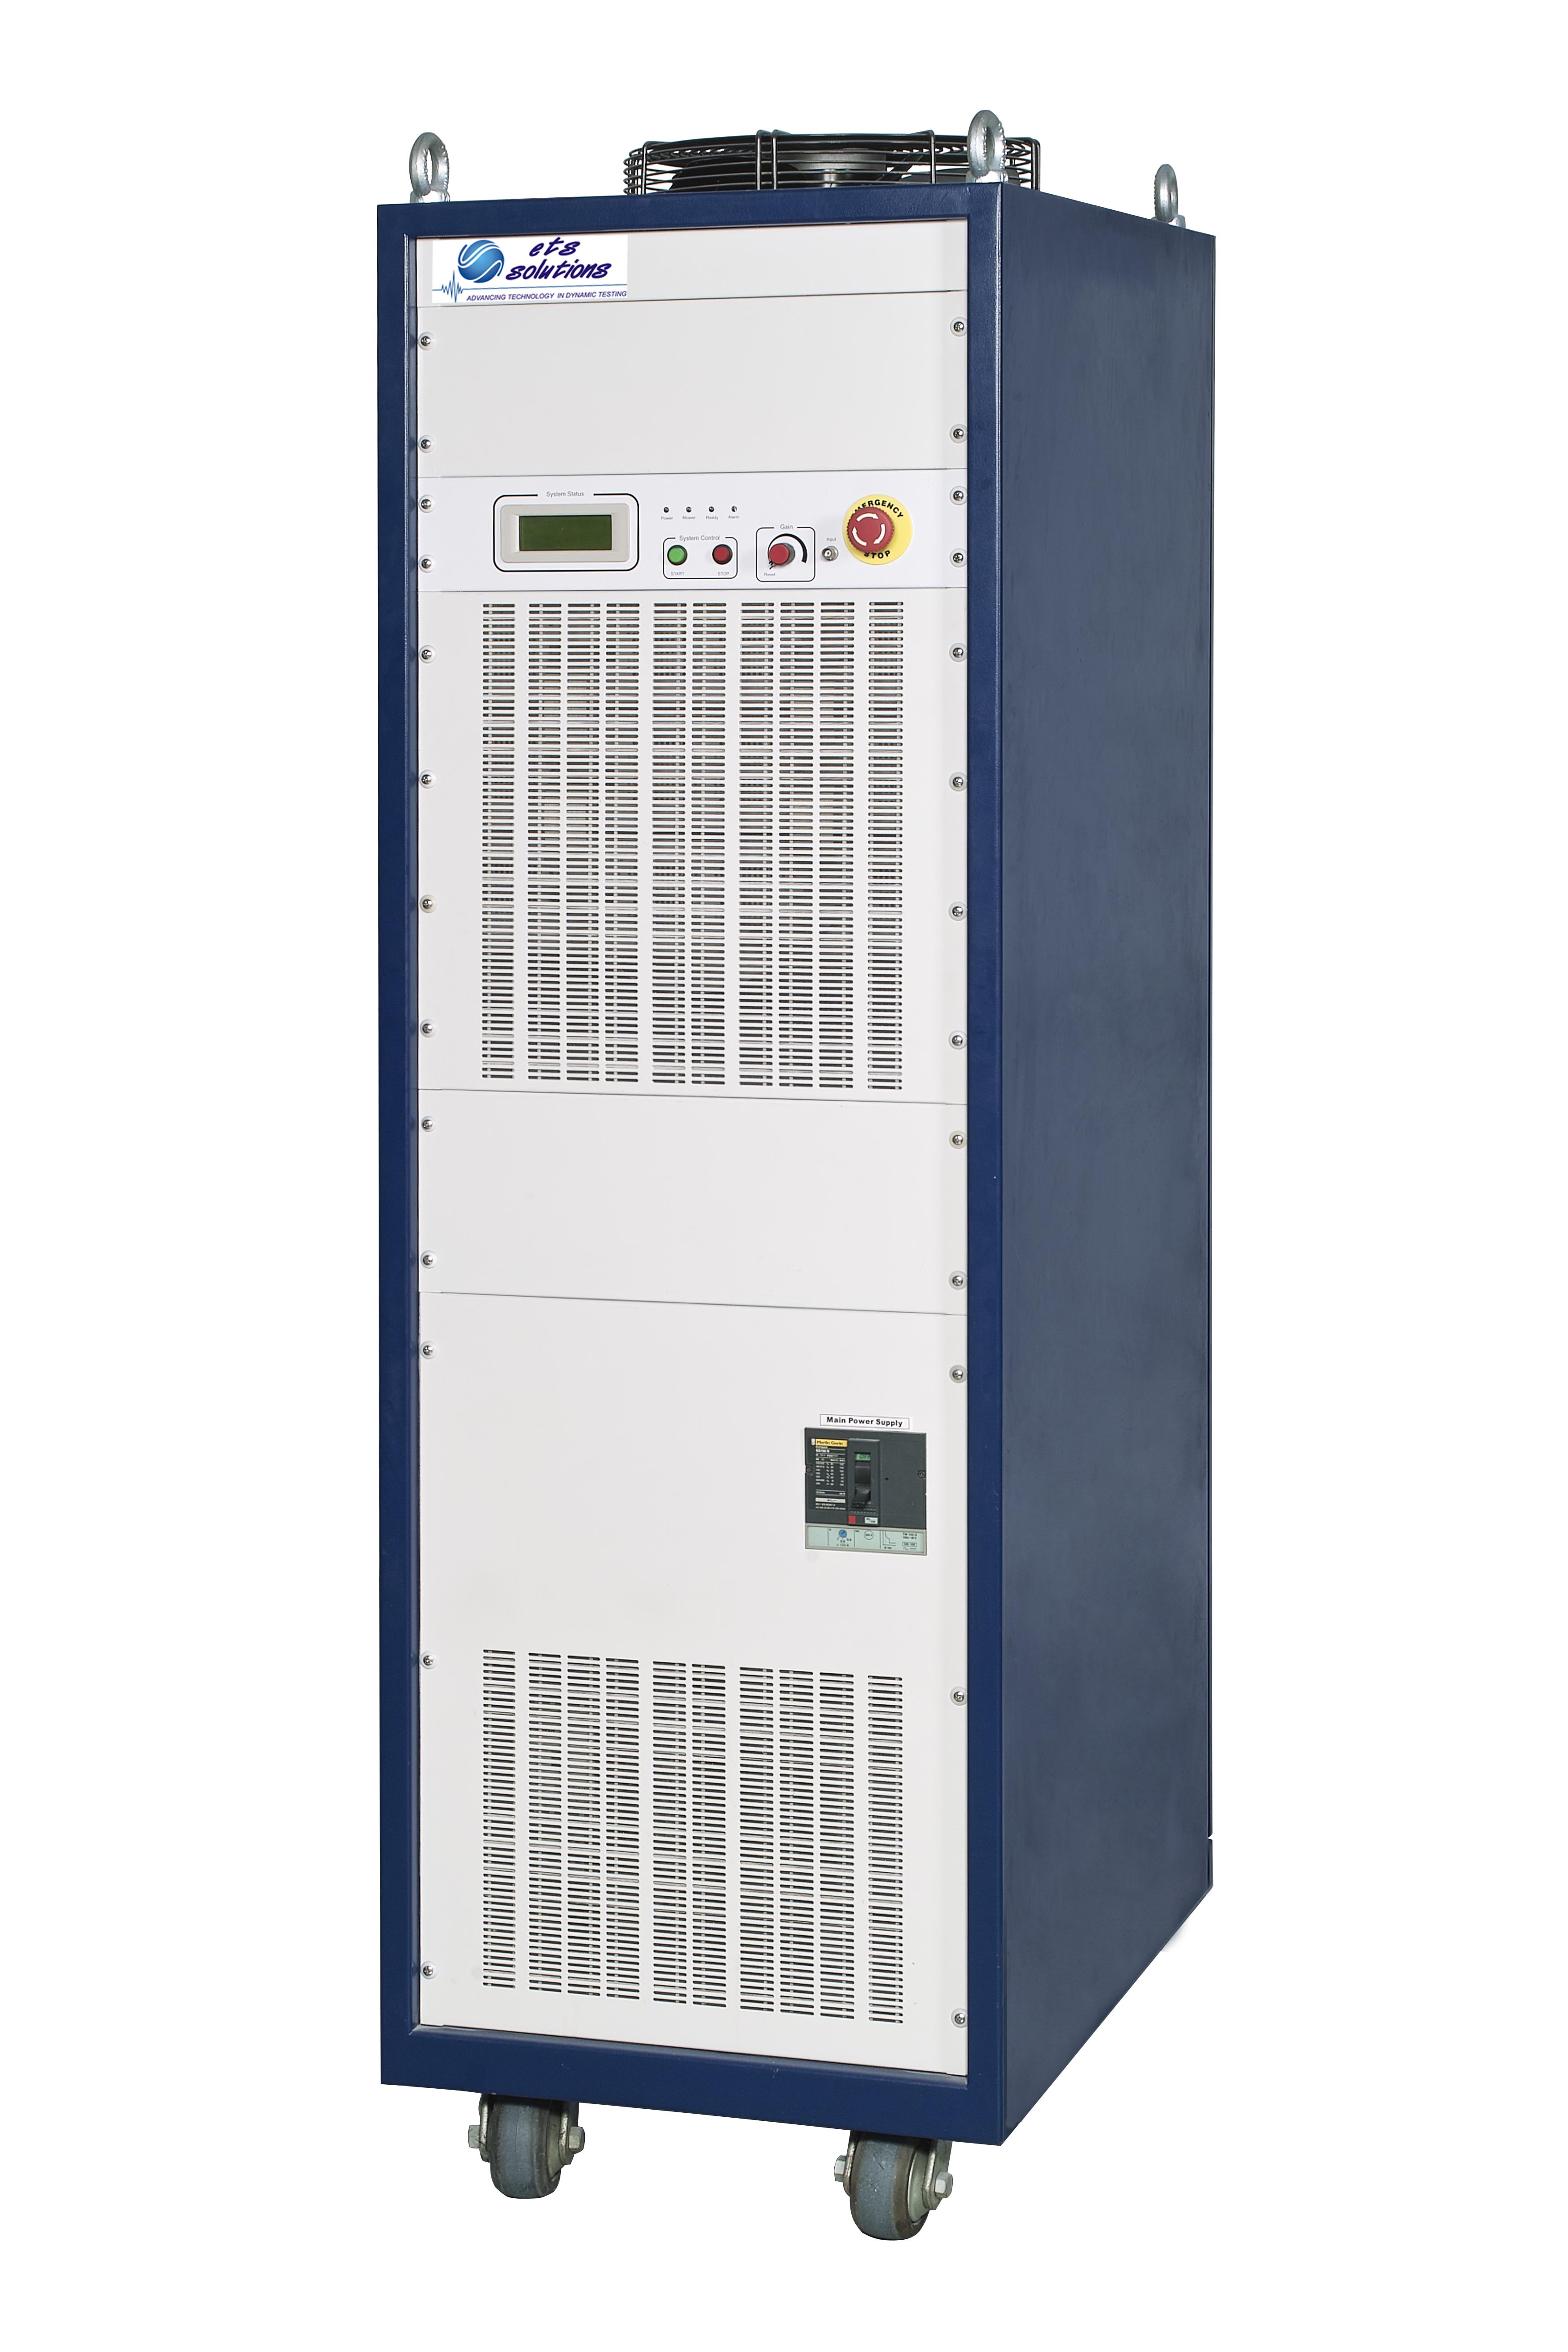 Cabinets: 1,
Max Power Output: 13kVA to 48kVA,
Max Output Voltage: 120V,
Max Output Current: 400A